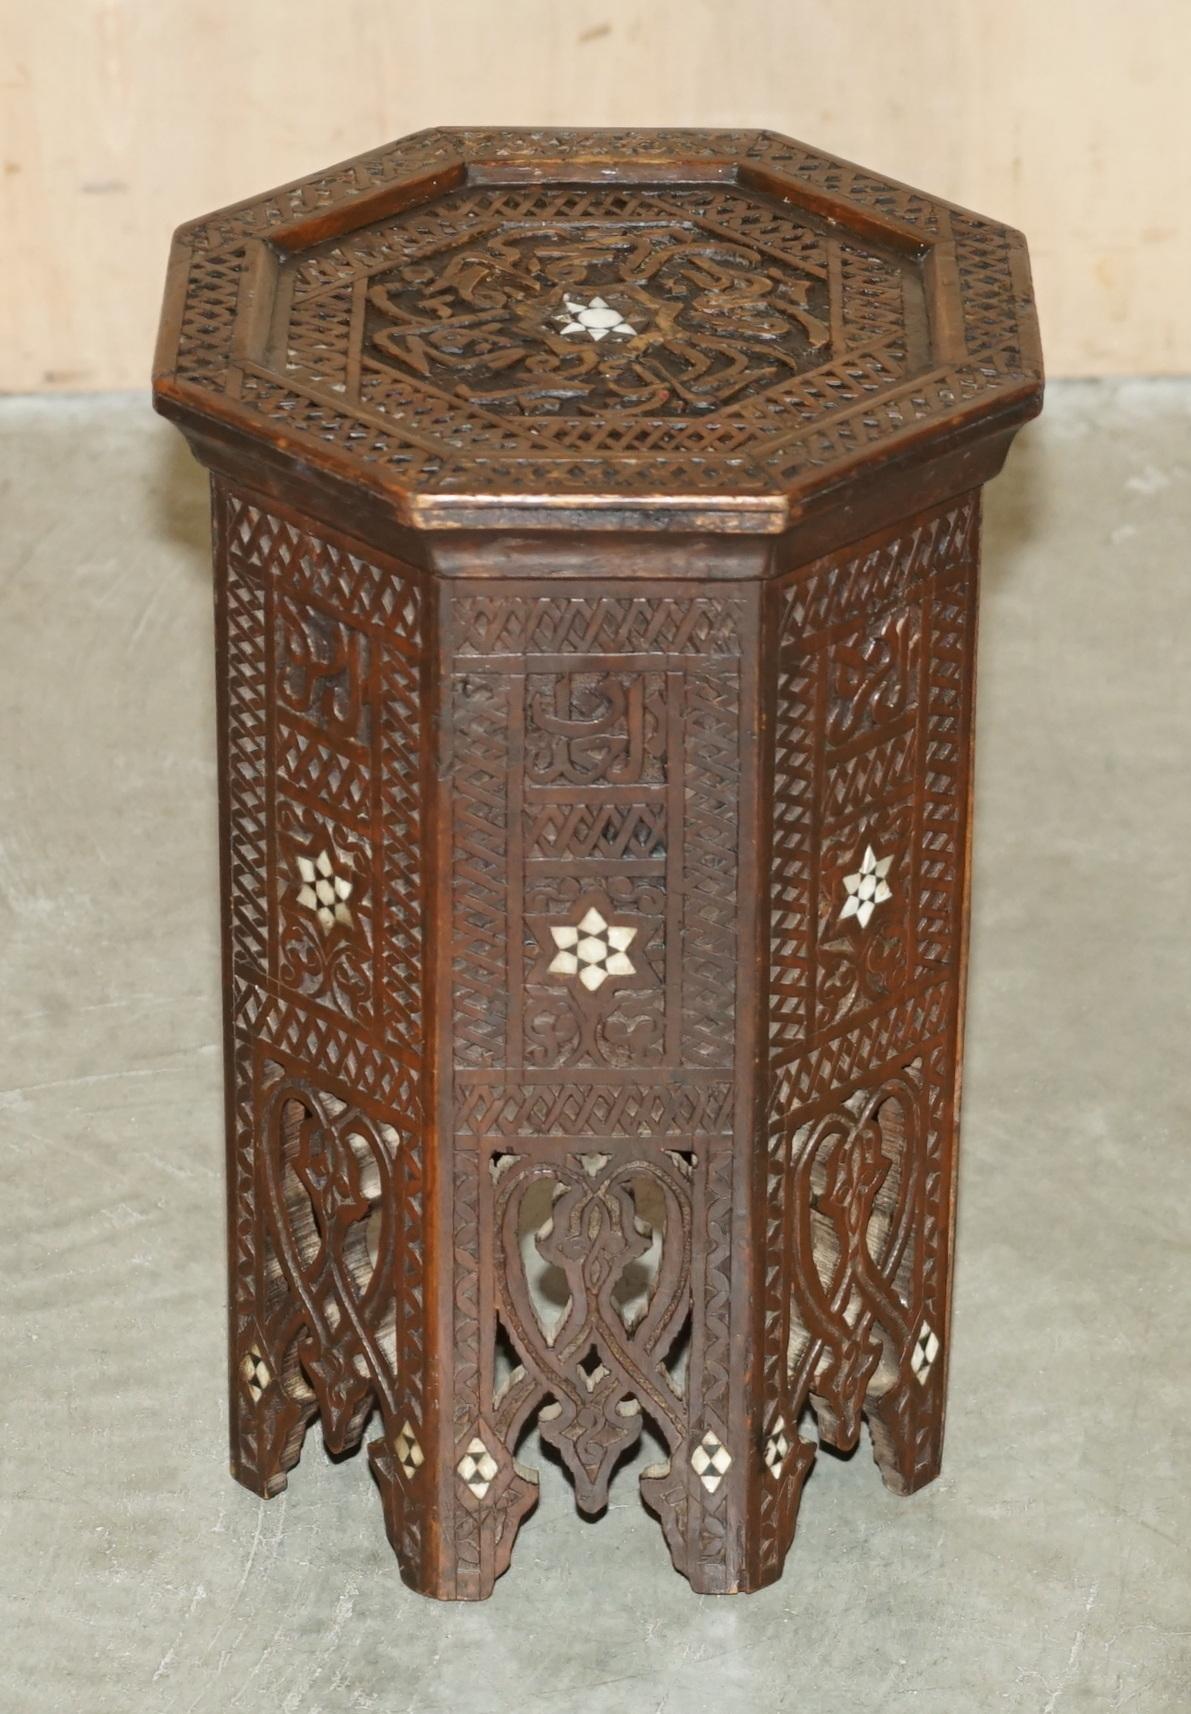 Royal House Antiques

Royal House Antiques is delighted to offer for sale this lovely and rare Moroccan hand carved folding table retailed through Liberty's London circa 1880

Please note the delivery fee listed is just a guide, it covers within the